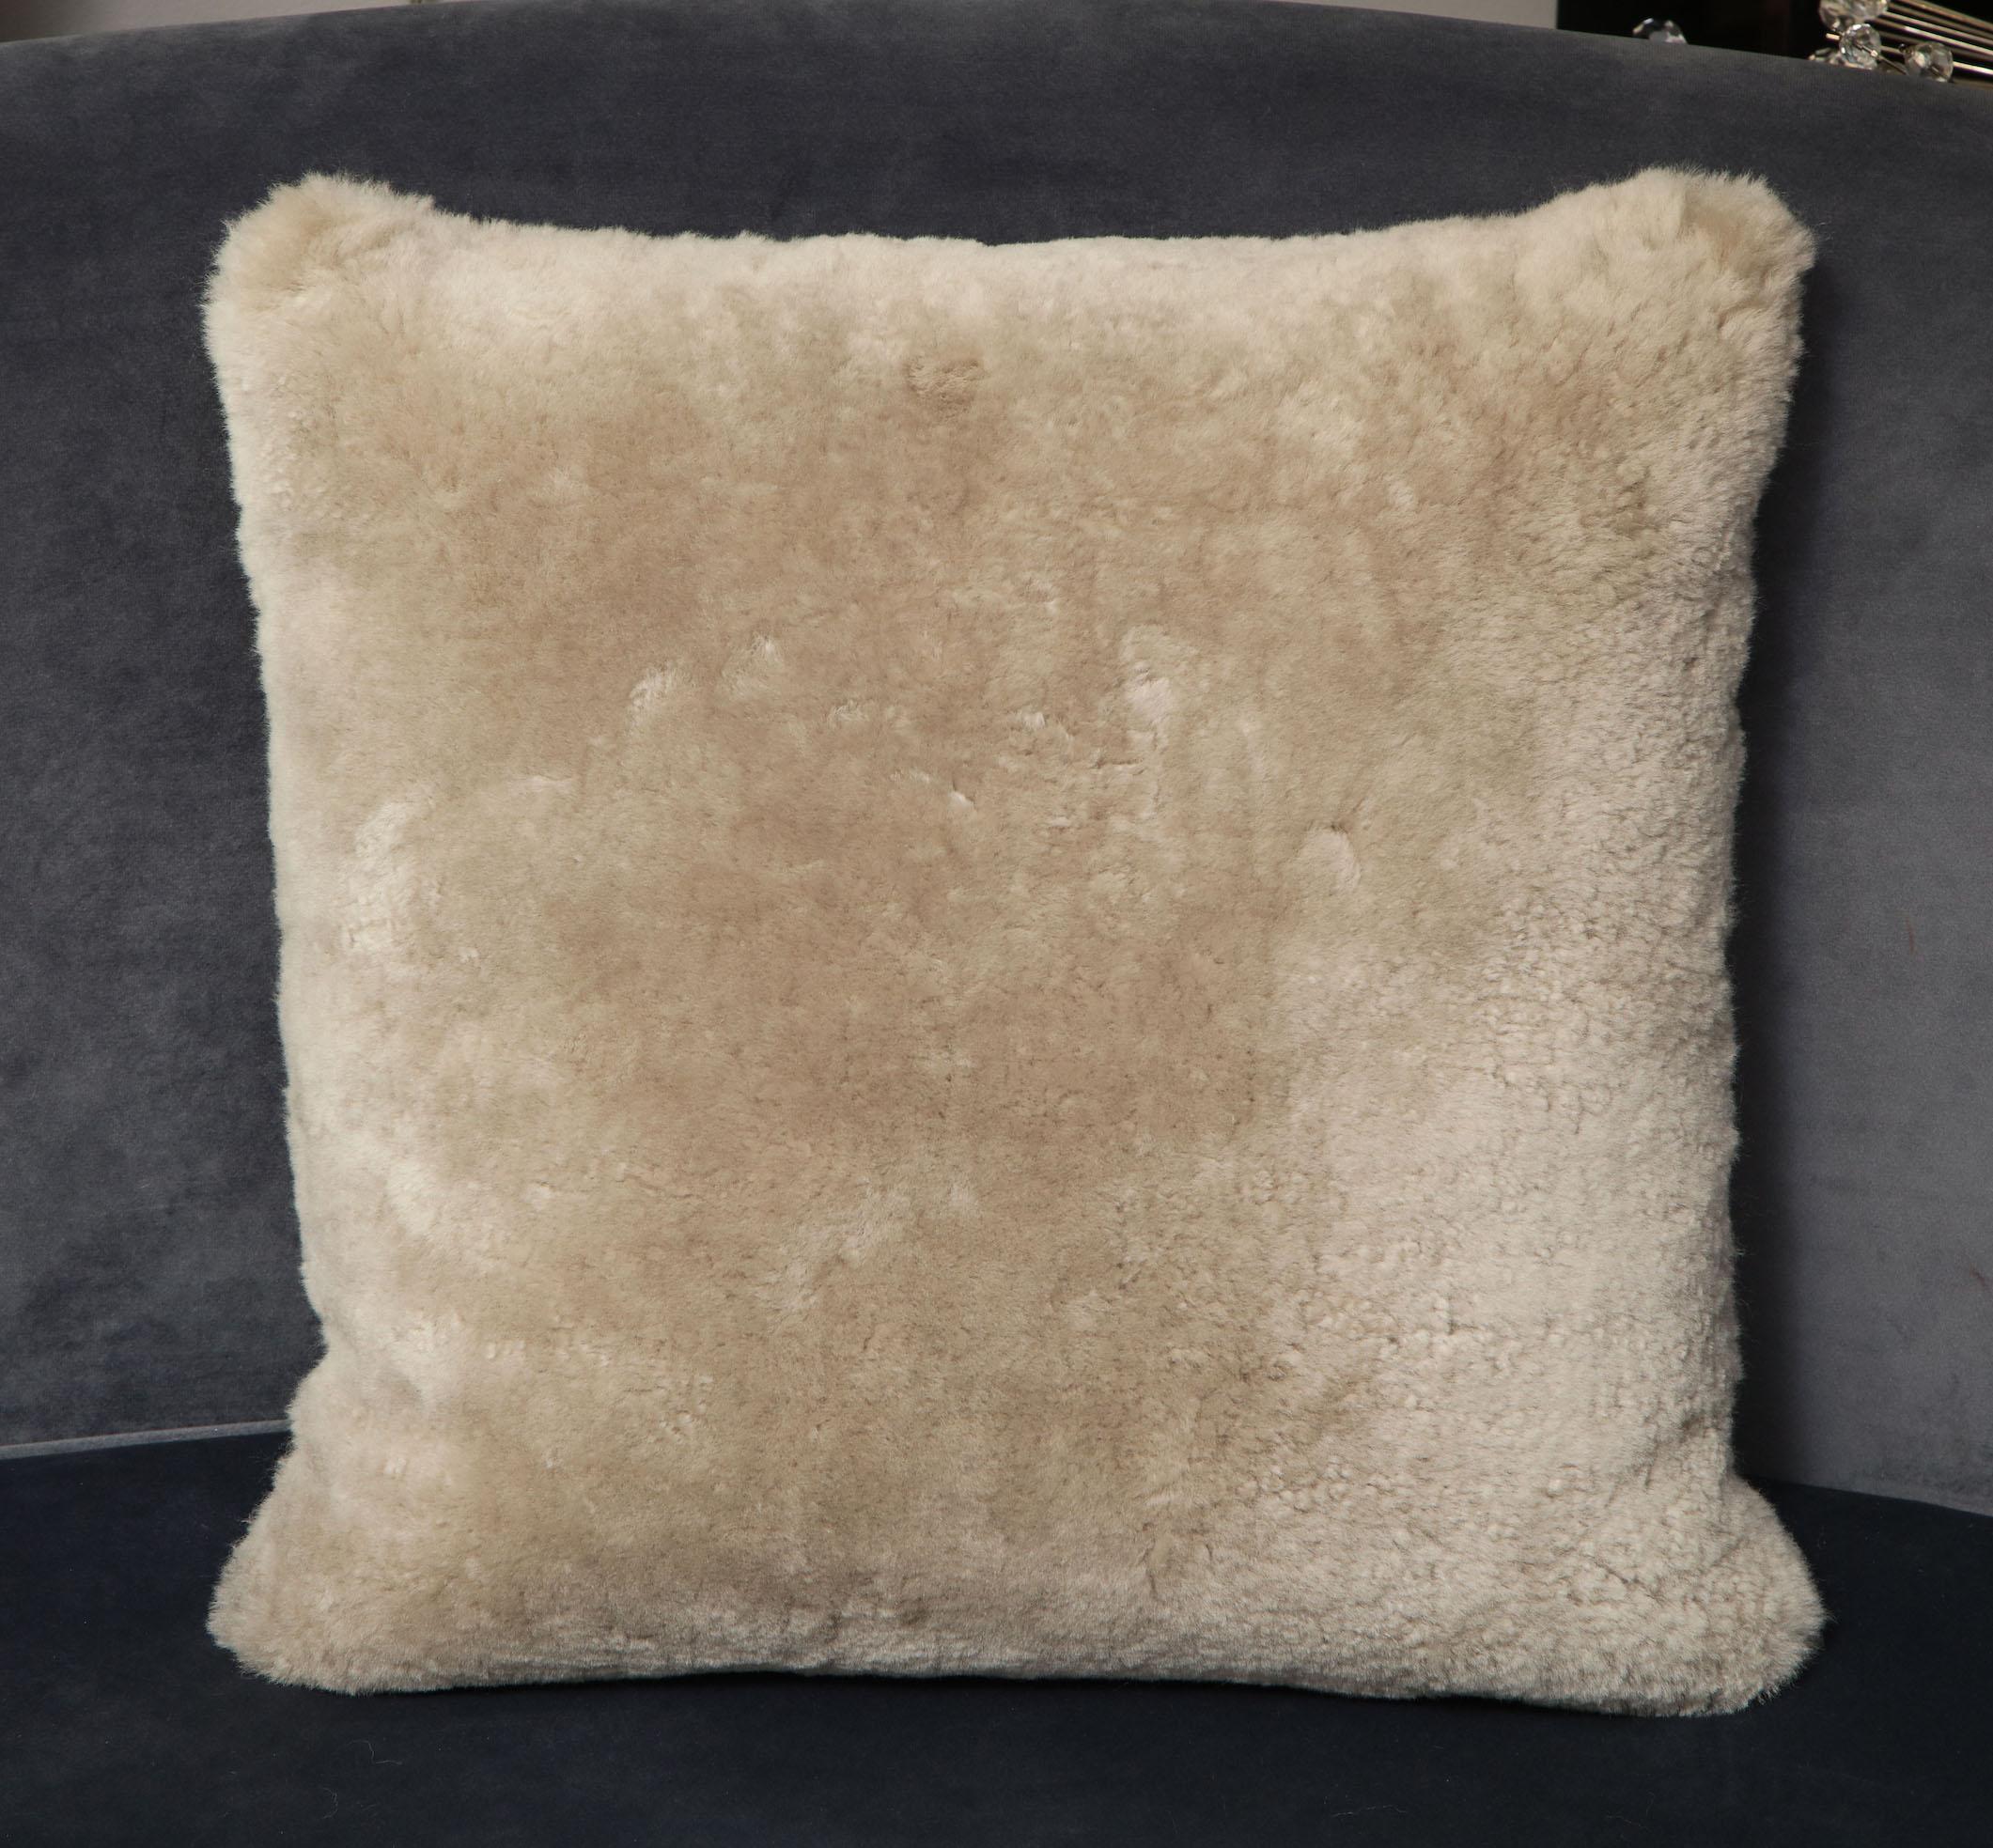 Genuine shearling pillow in taupe color. 2 available for immediate purchase. Also, custom sizing is available.

